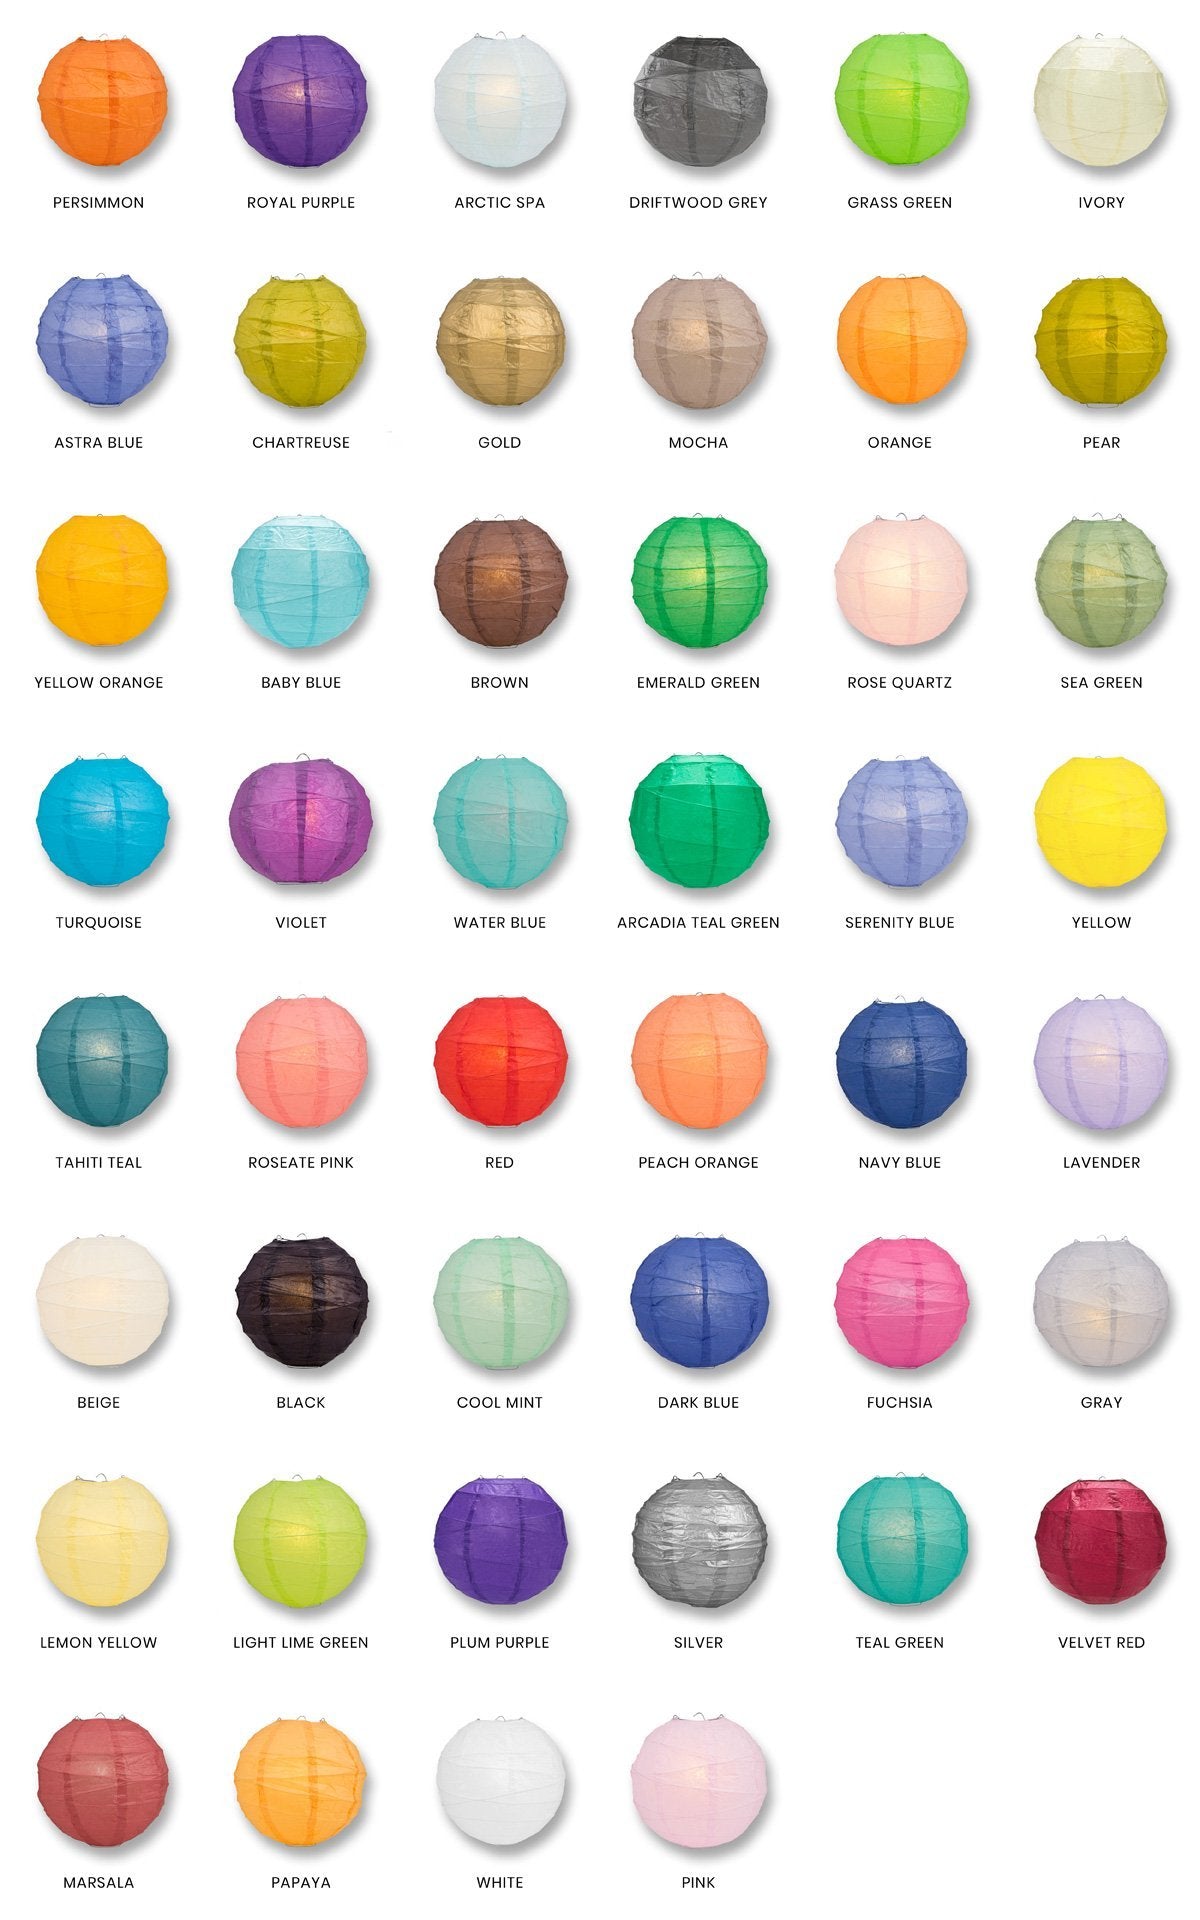 20" Crisscross Ribbing Paper Lanterns - Door-2-Door - Various Colors Available (100-Pieces Master Case, 60-Day Processing)